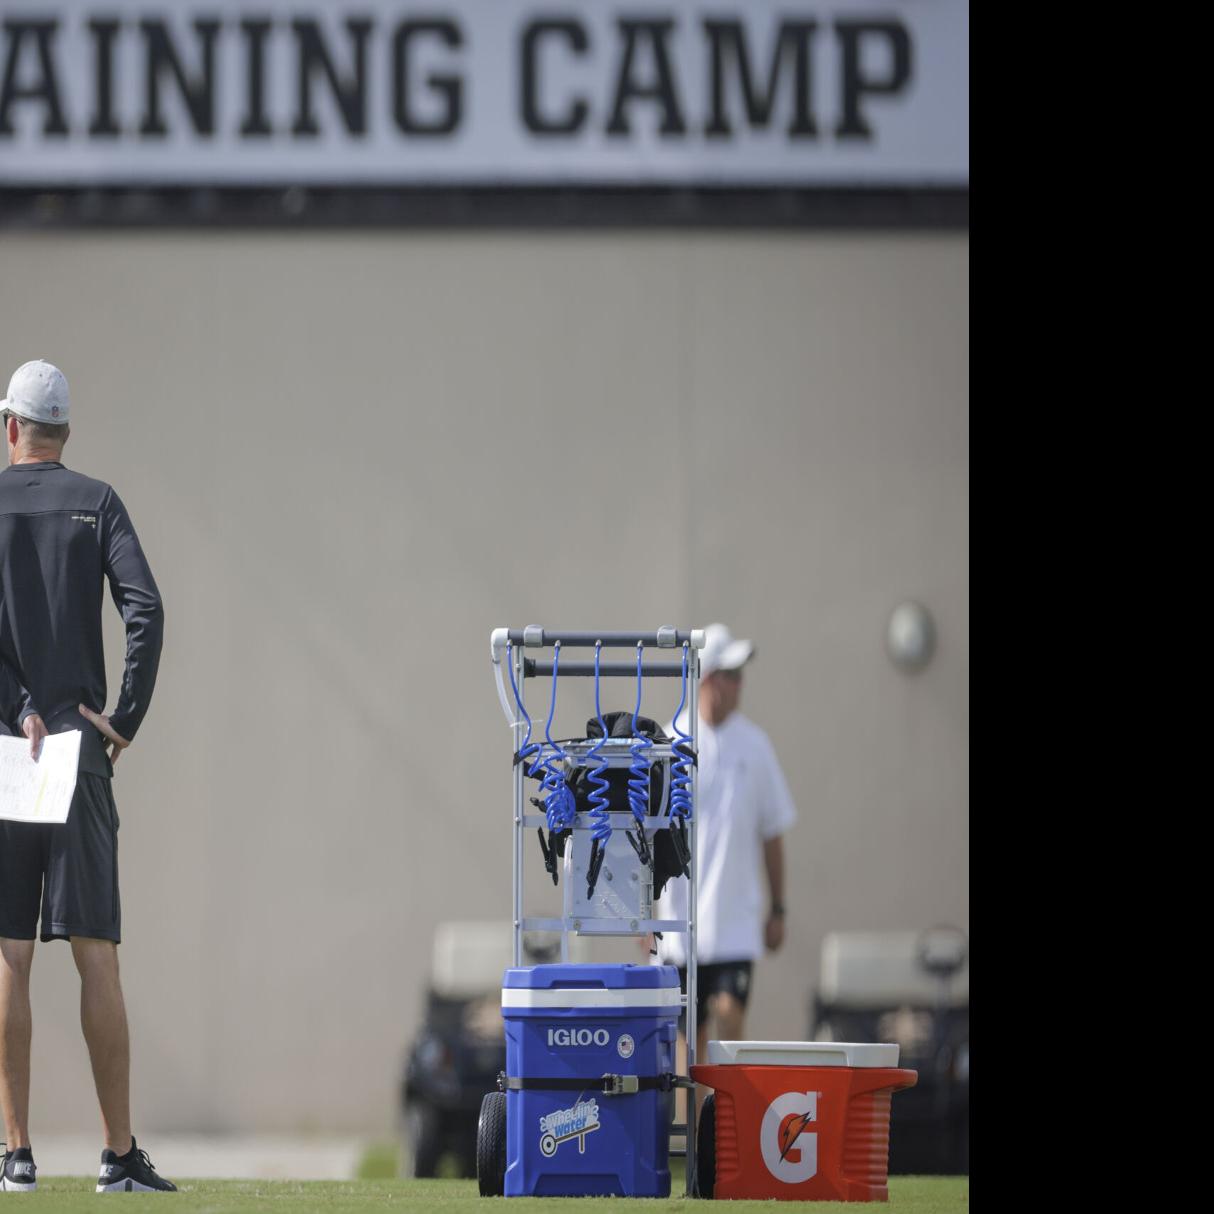 Saints announce schedule for 2023 Training Camp presented by Rouses Markets